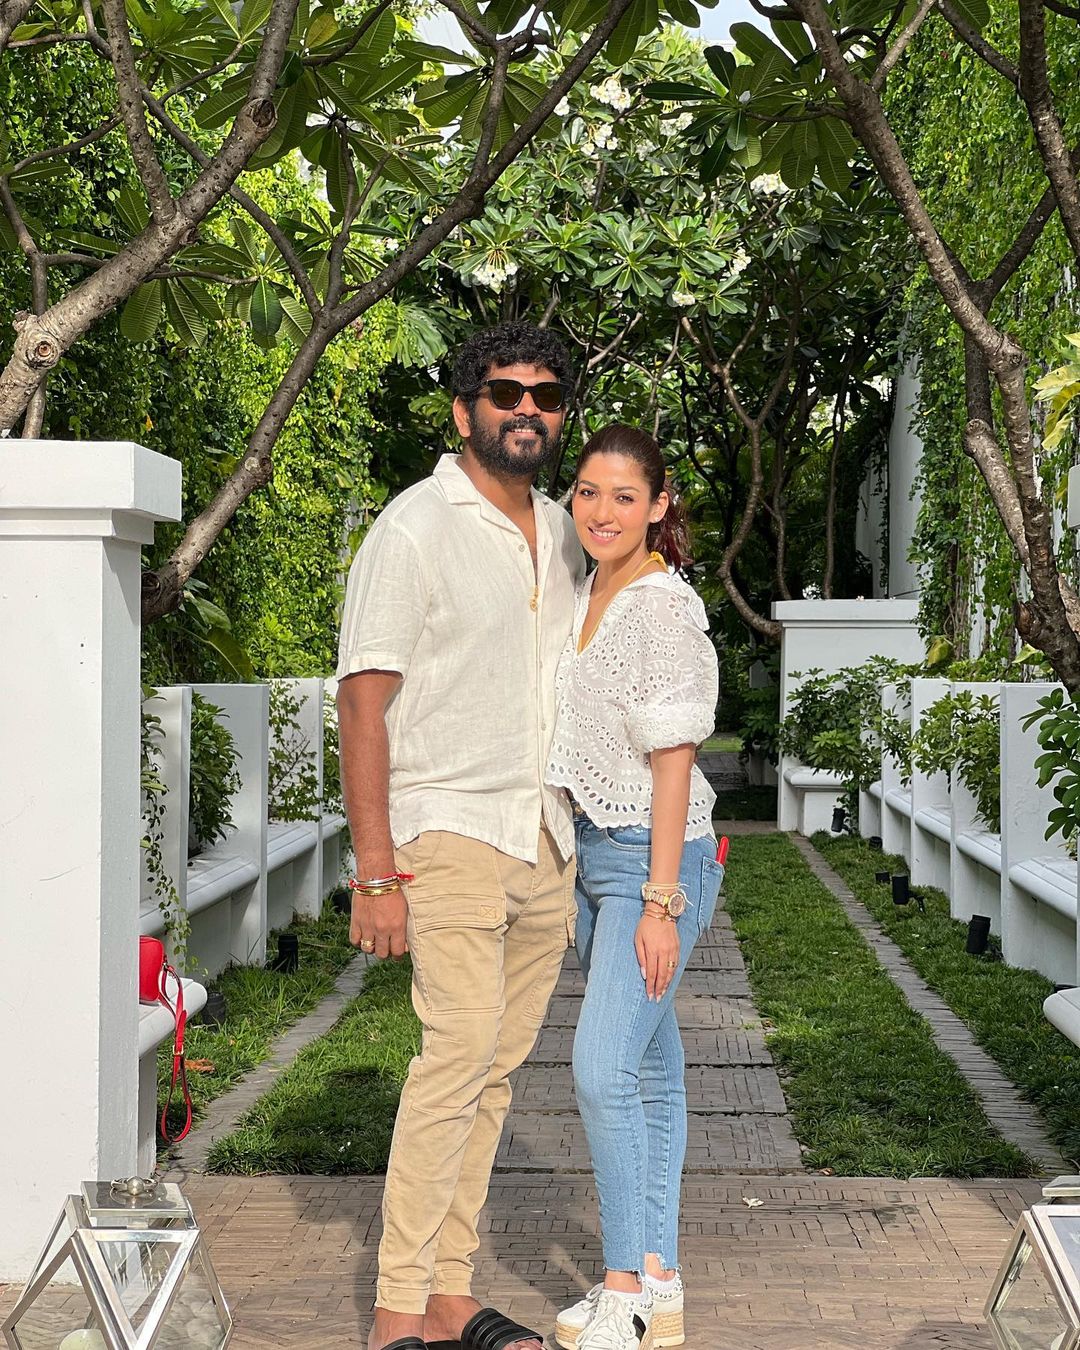 Nayanthara vignesh shivan plans to reveal photos after ott fails to buy